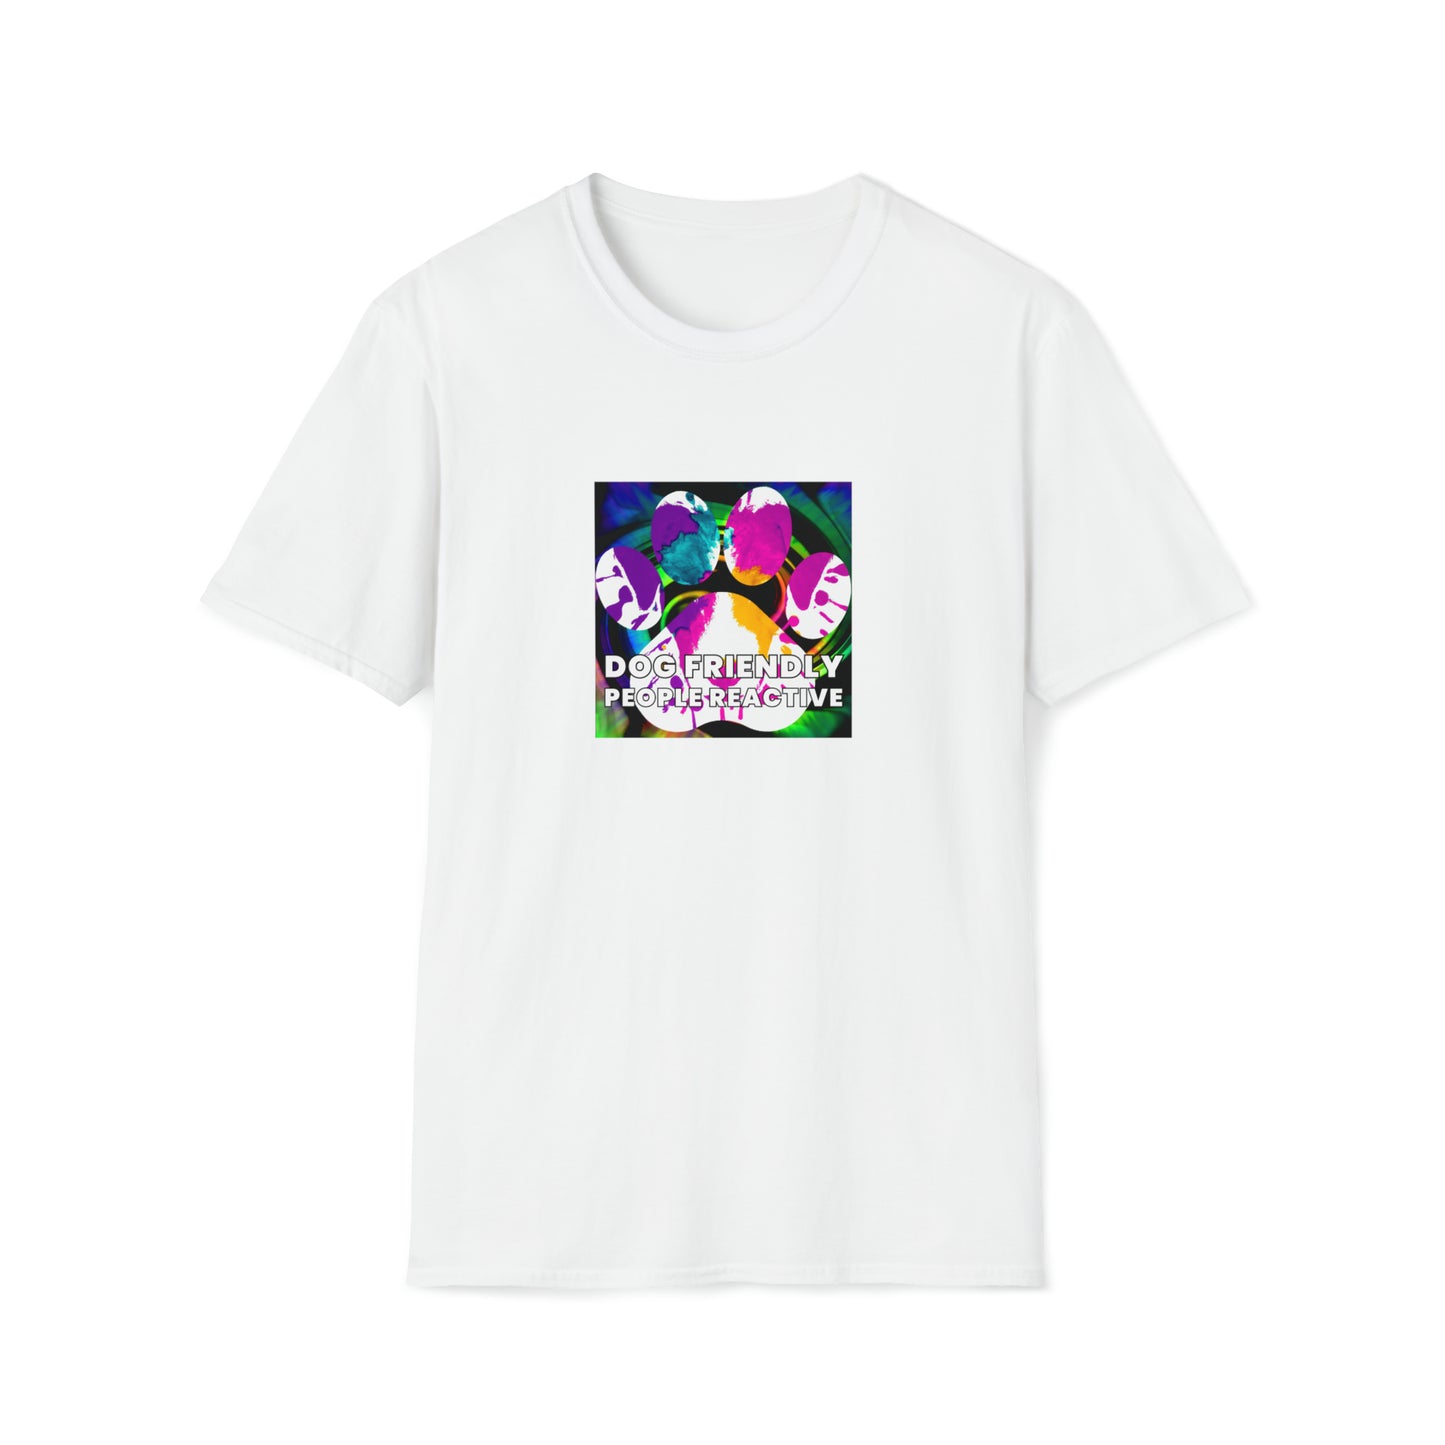 TruFashionsByTay - "Dog Friendly, People Reactive" (colored swirl) Unisex Tee